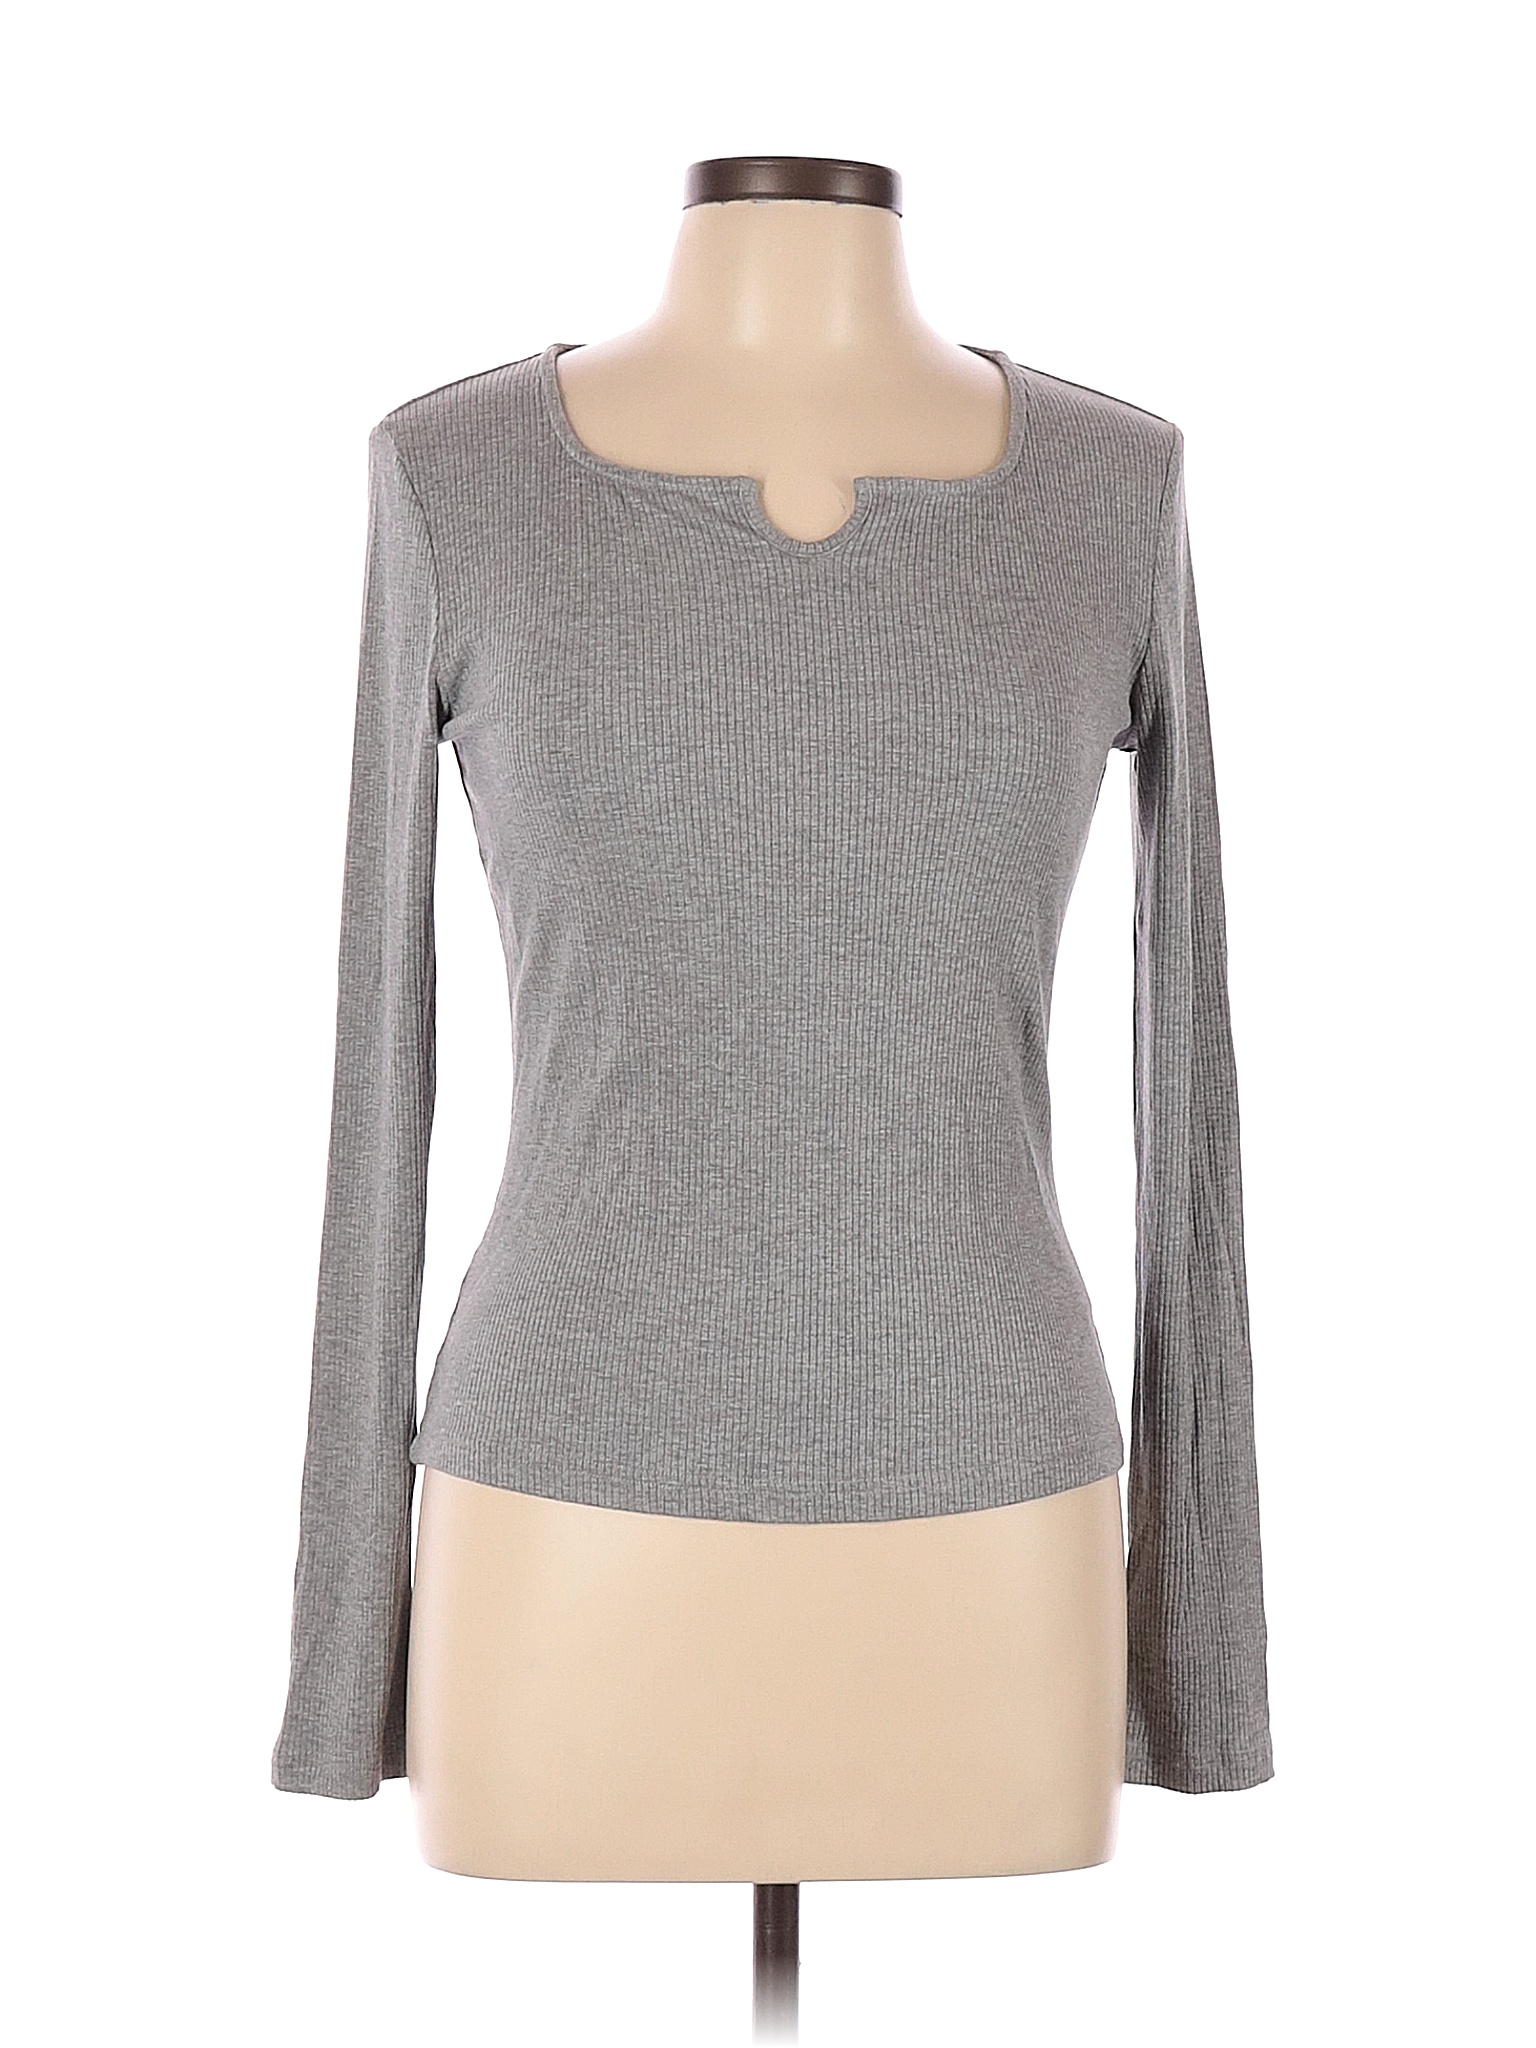 Fano Studios Women's Clothing On Sale Up To 90% Off Retail | thredUP